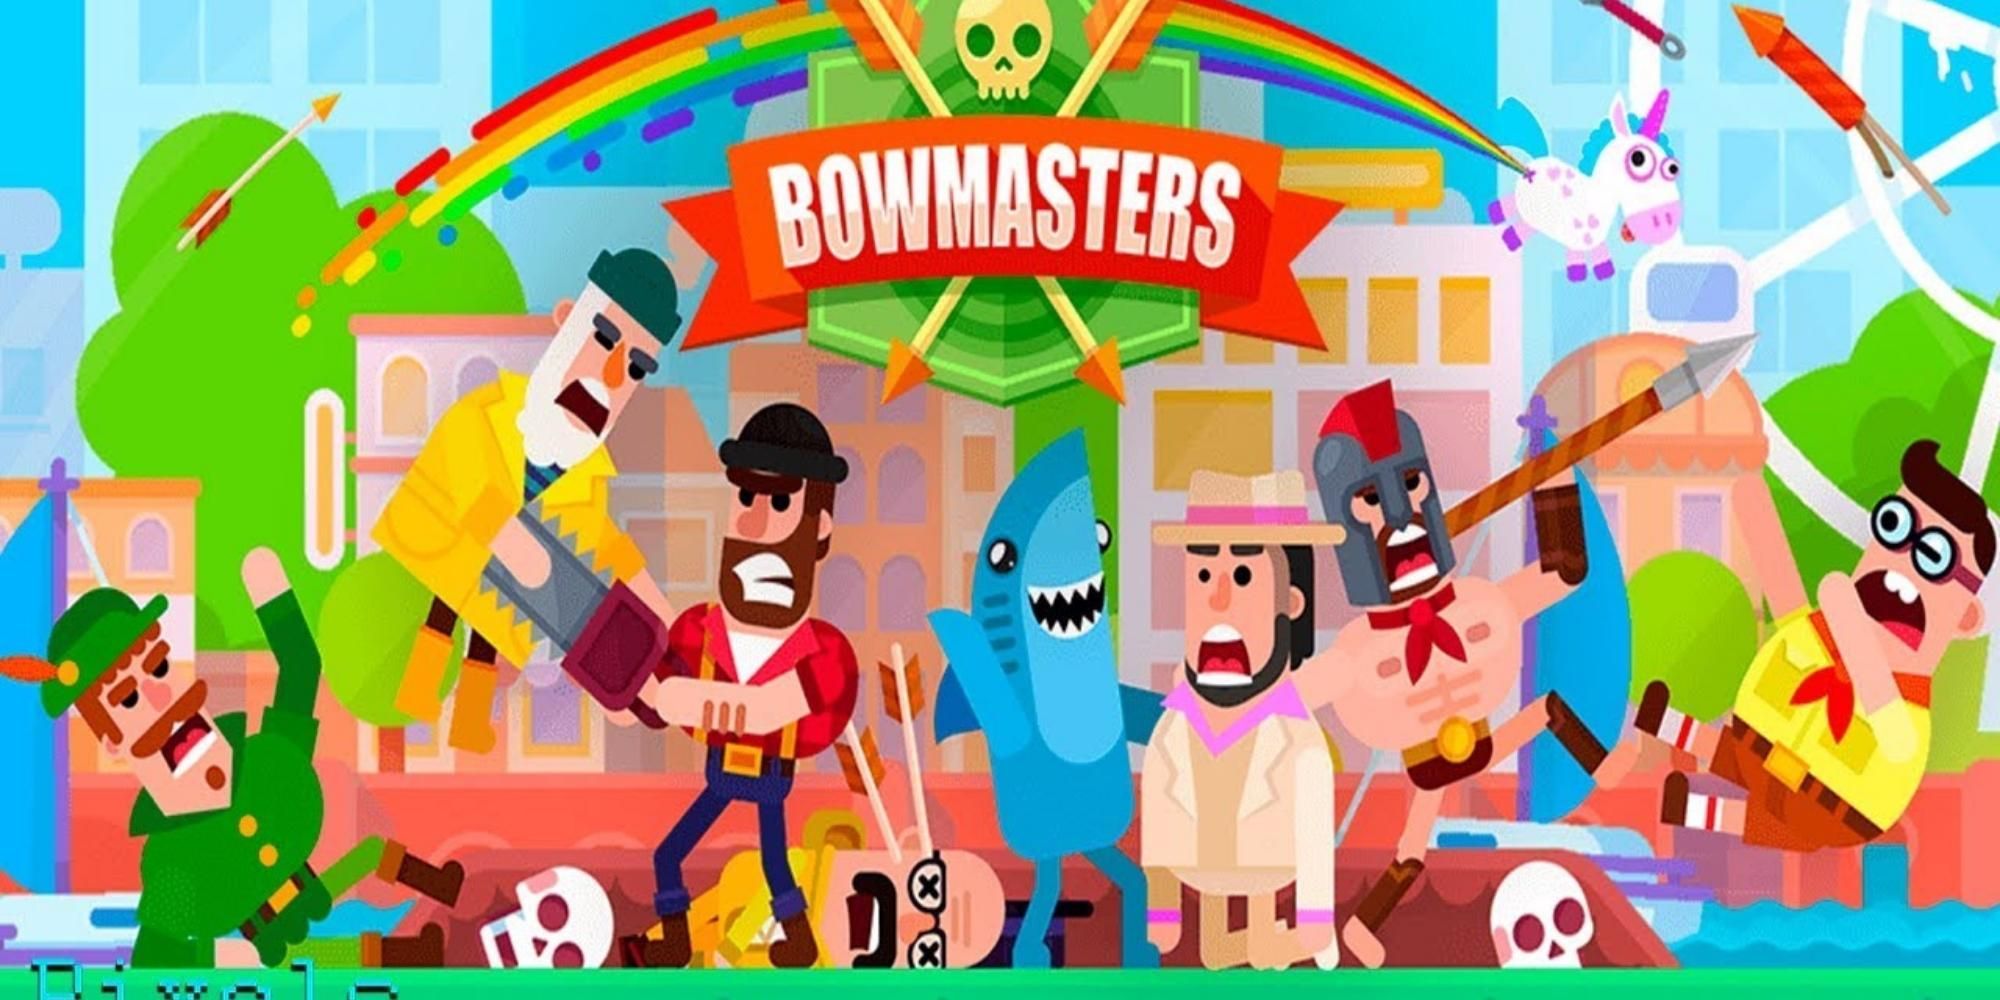 charactres in Bowmasters